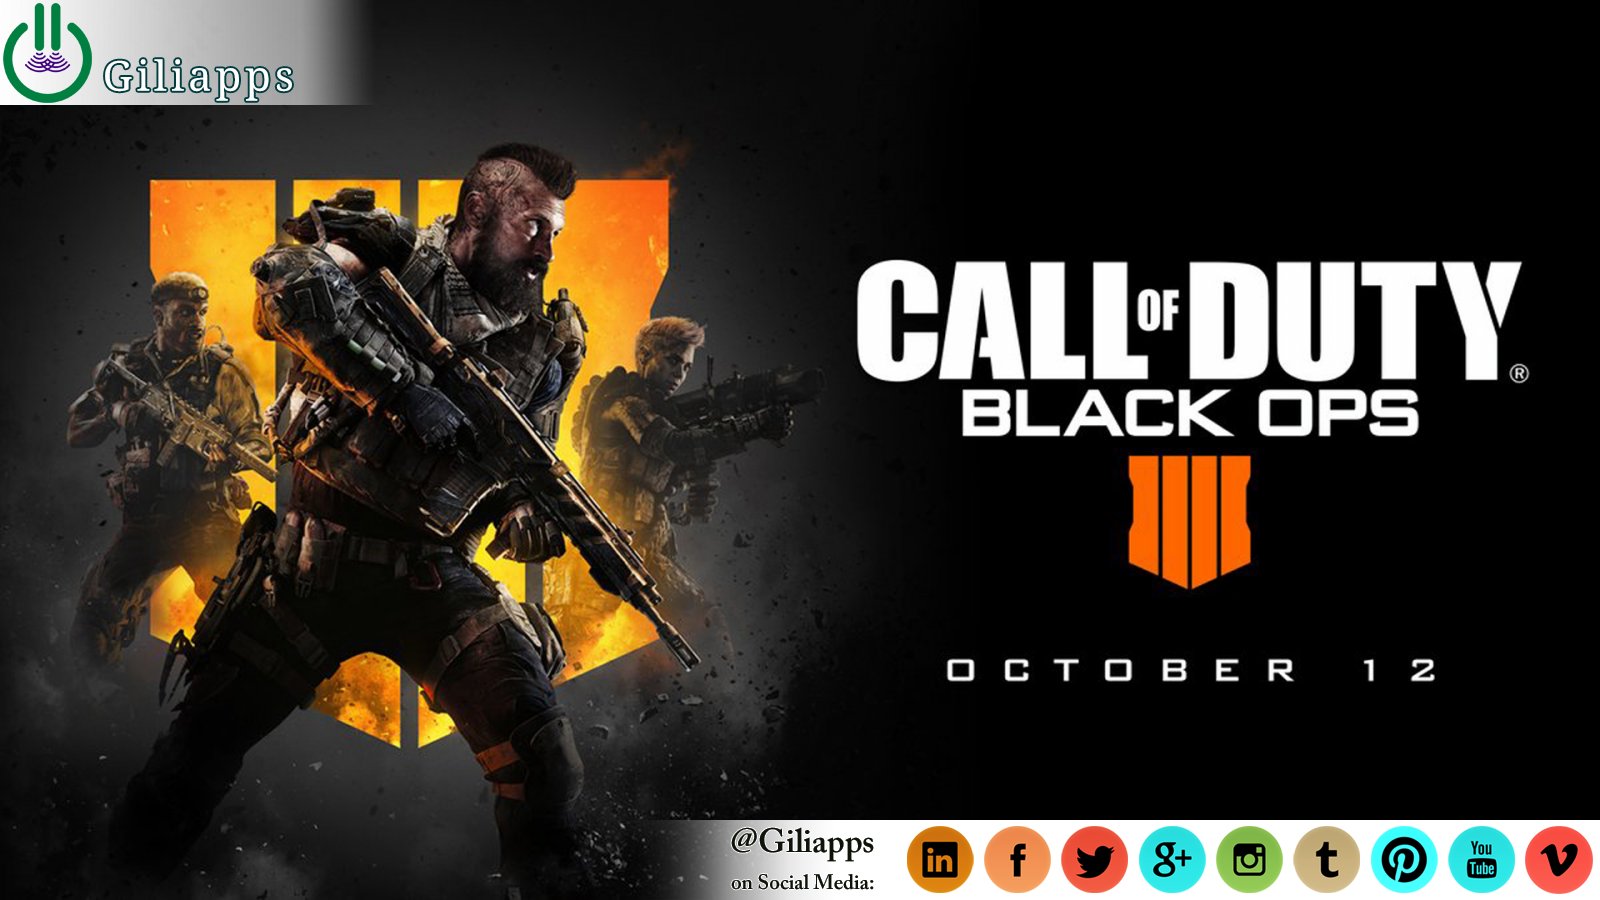 Call of Duty: Black Ops 4 will release on 12 Oct 2018